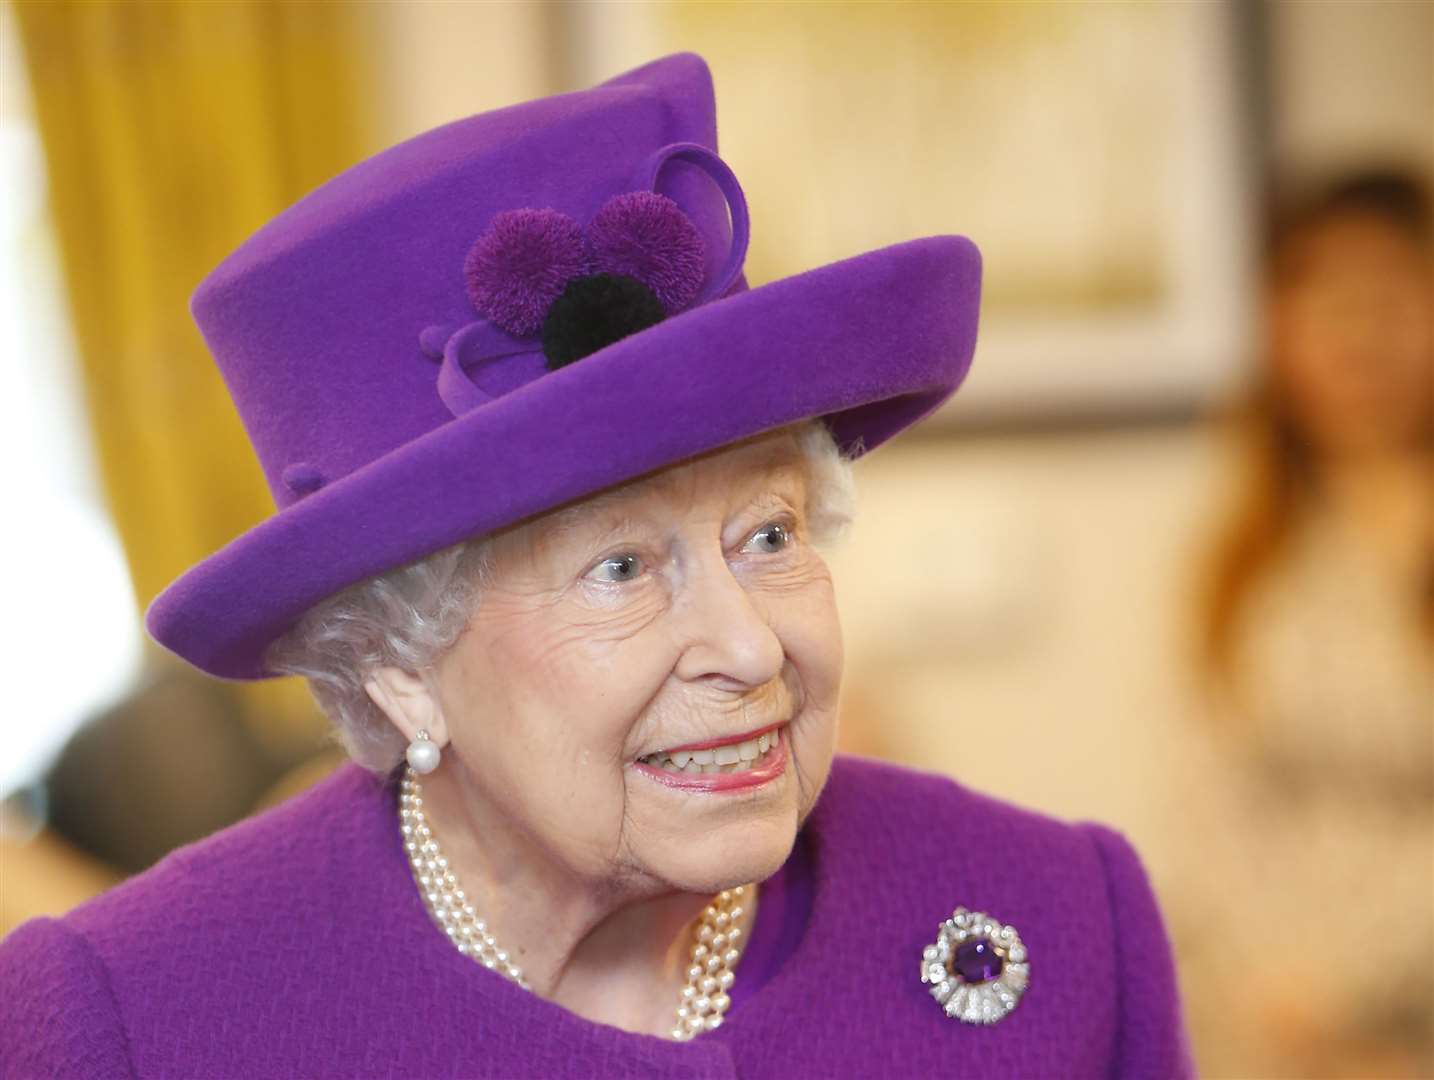 The hospice's Andy Lowden said: “The Queen has shown us how to live life to the fullest"